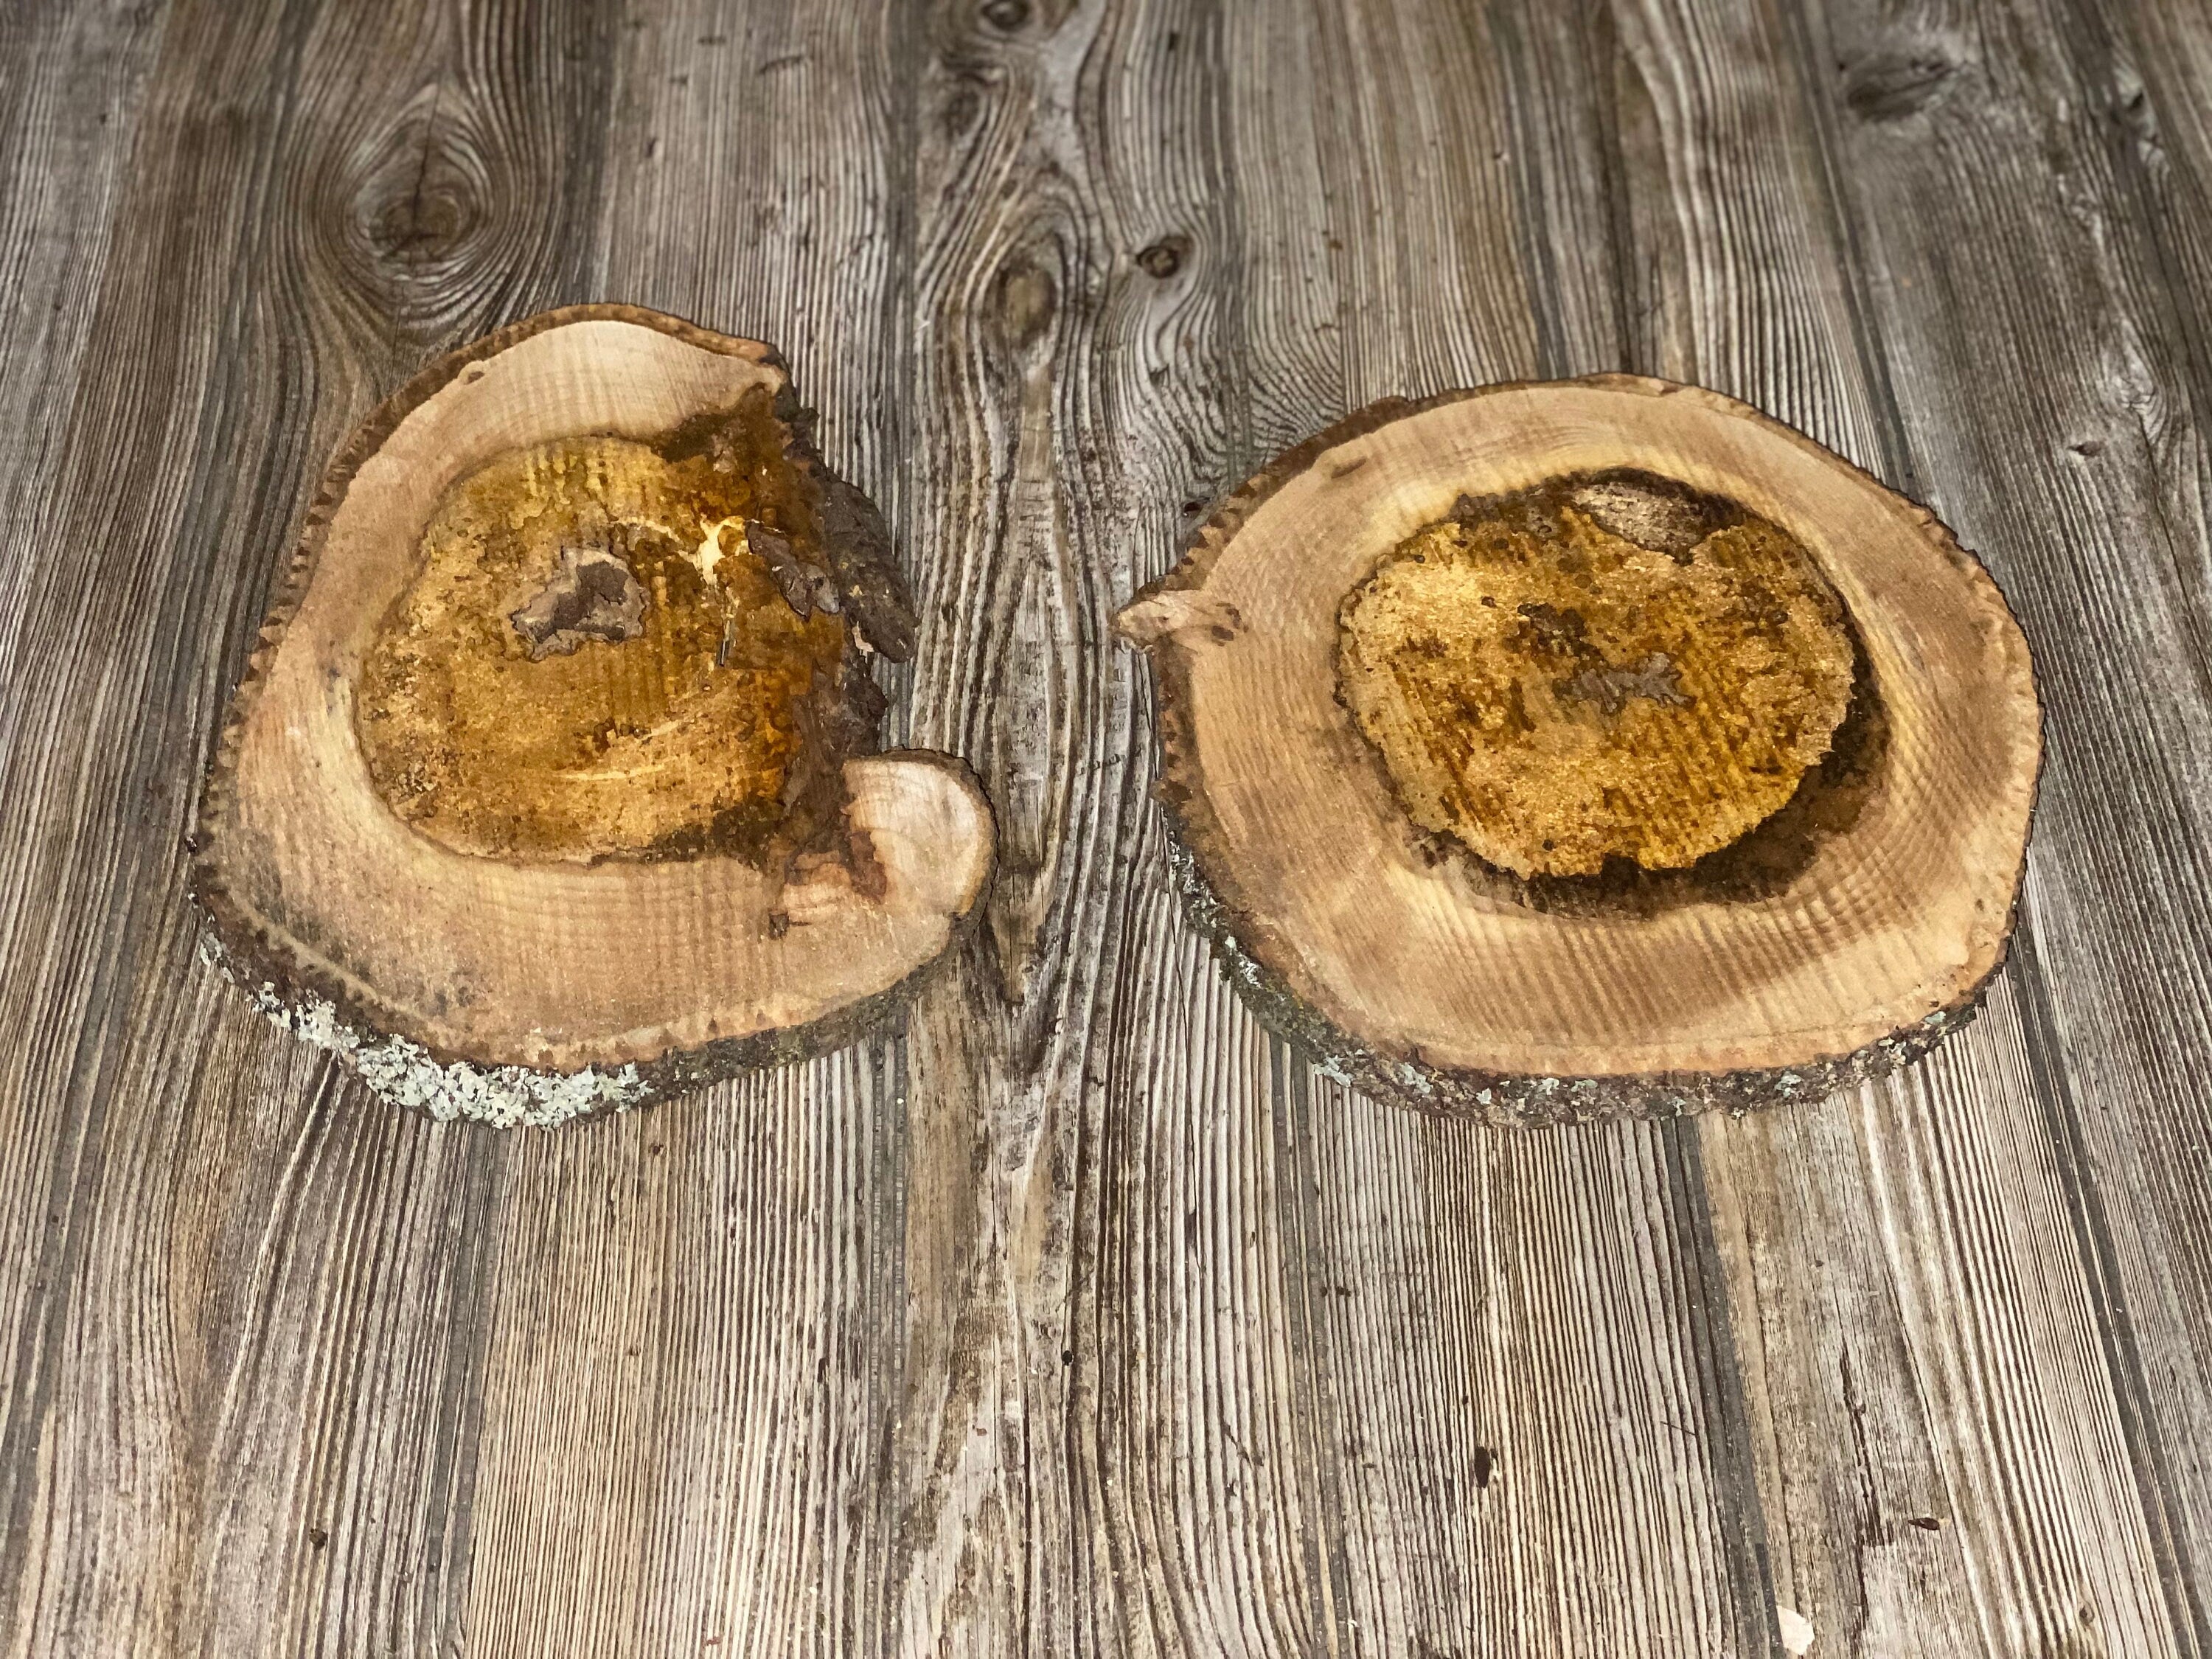 Two Hickory Burl Slices, Approximately 10.5-11 Inches Long by 8-10 Inches Wide and 3/4 Inch Thick